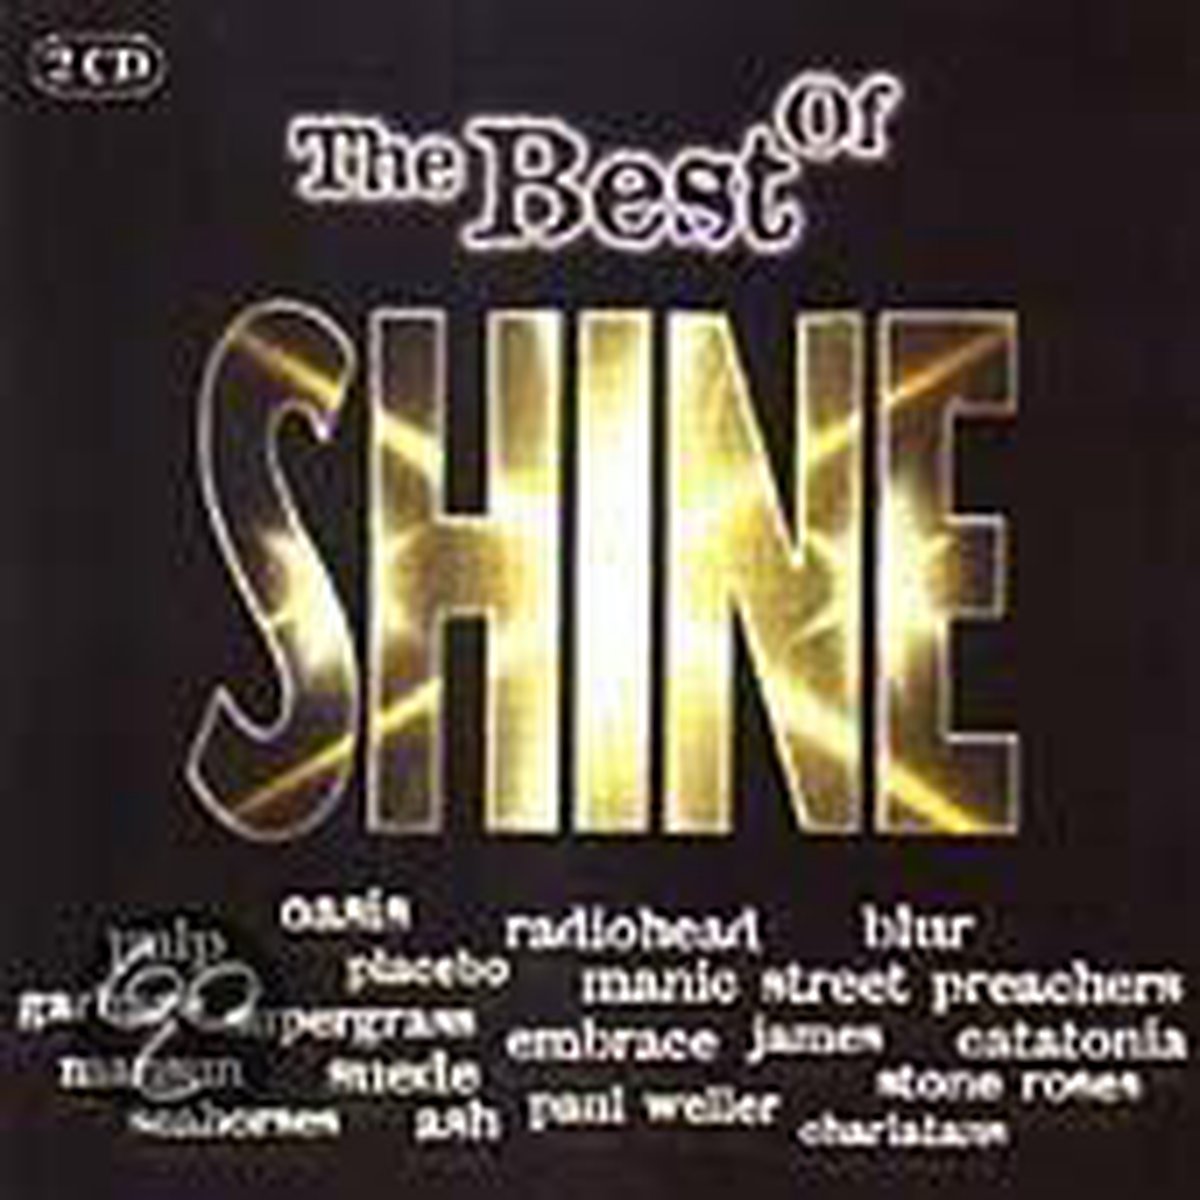 The Best Of Shine - various artists